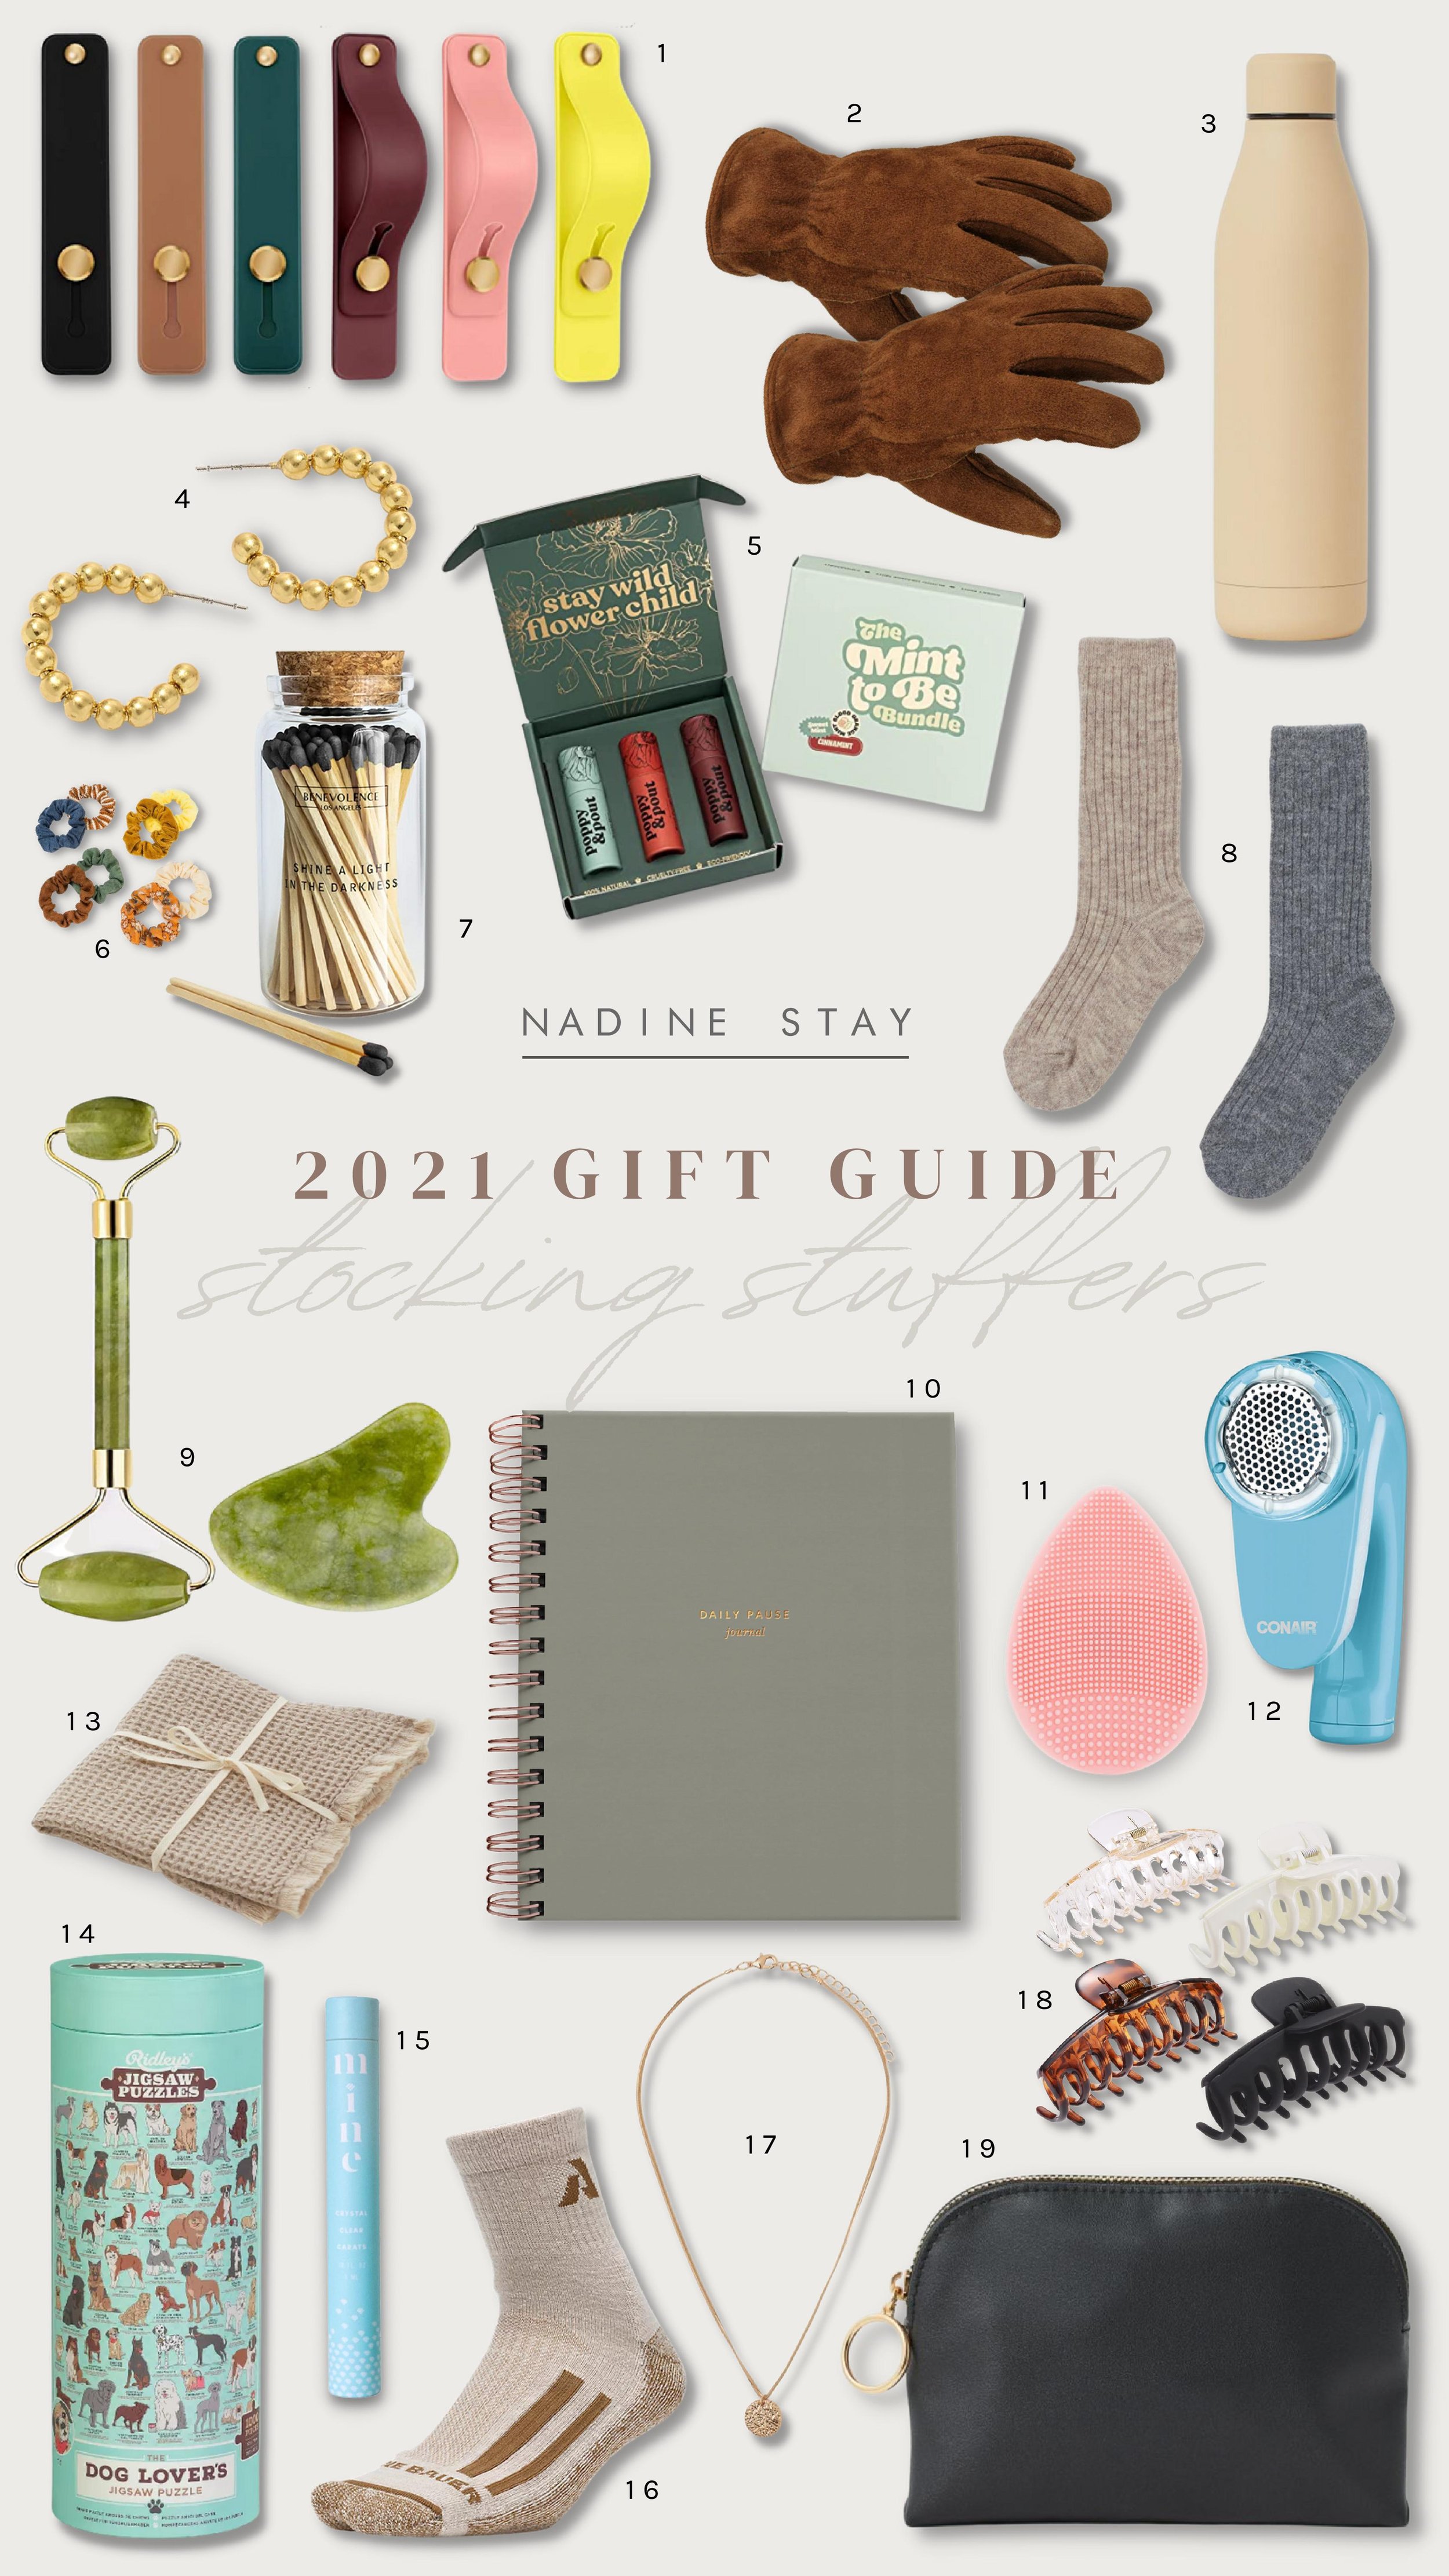 2021 Holiday Gift Guide: Stocking Stuffer Ideas | 19 gifts he or she will love. Accessories, socks, journal, skin care essentials, puzzle, jewelry, work gloves, and more gifts you can give him or her this Christmas. | Nadine Stay